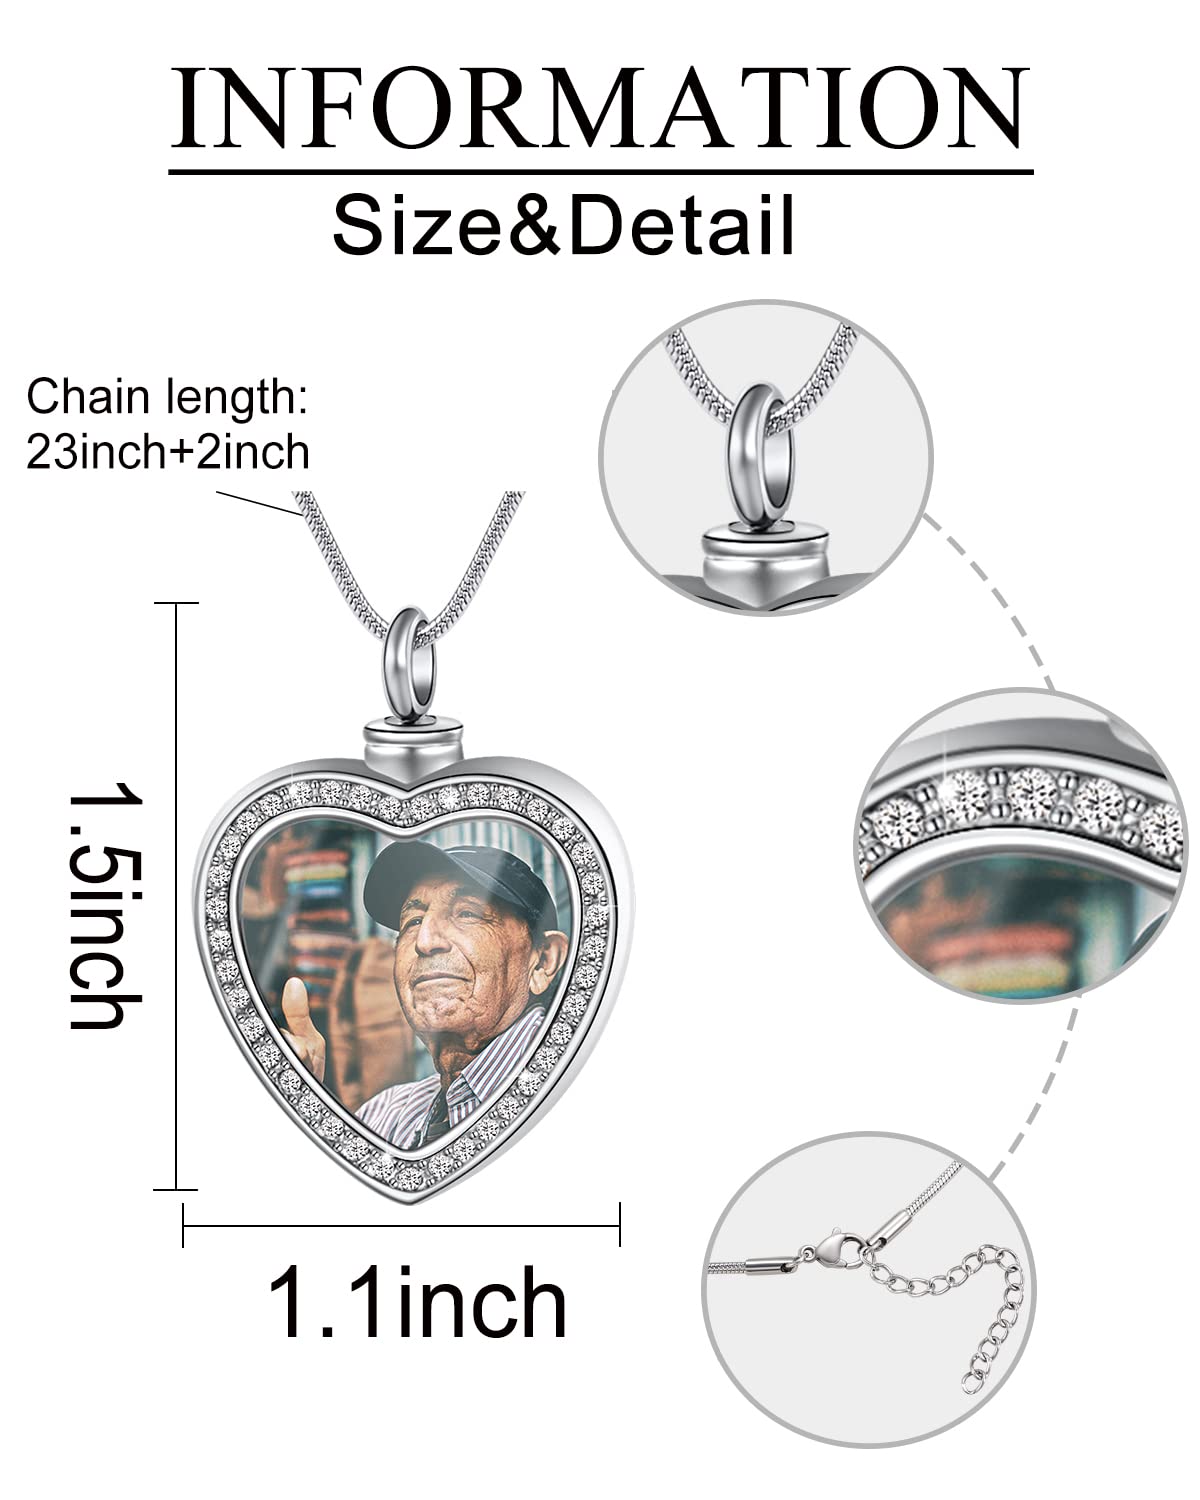 Fanery sue Customized Photo Urn Necklace for Ashes, Personalized Ashes Necklace with Picture Inside, Cremation Jewelry Ashes Keepsake Necklace for Women & Men